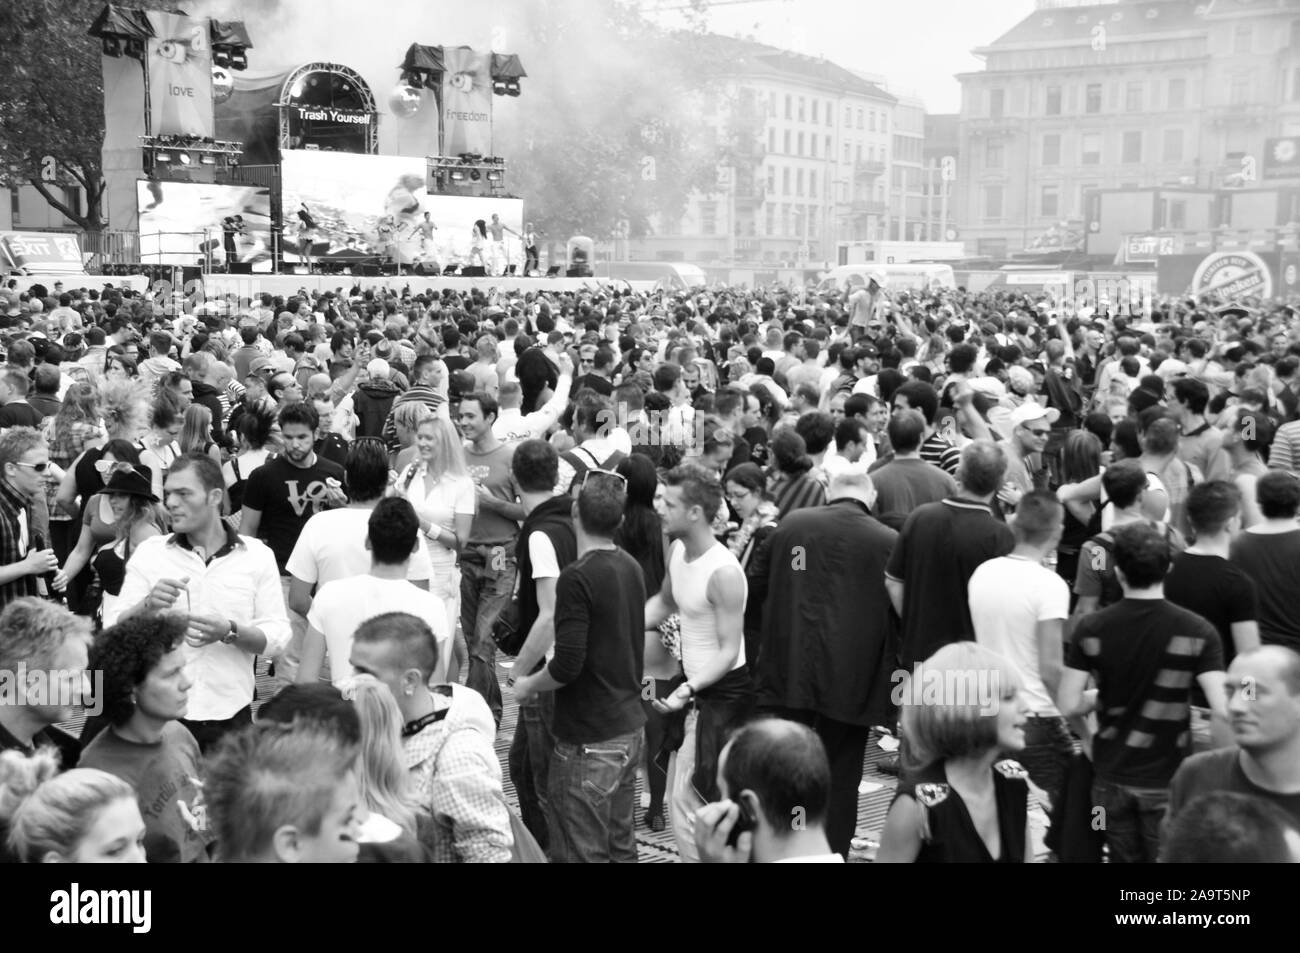 Streetparade Zürich: The Masses of peoples are a big challenge for the security peoples. Stock Photo